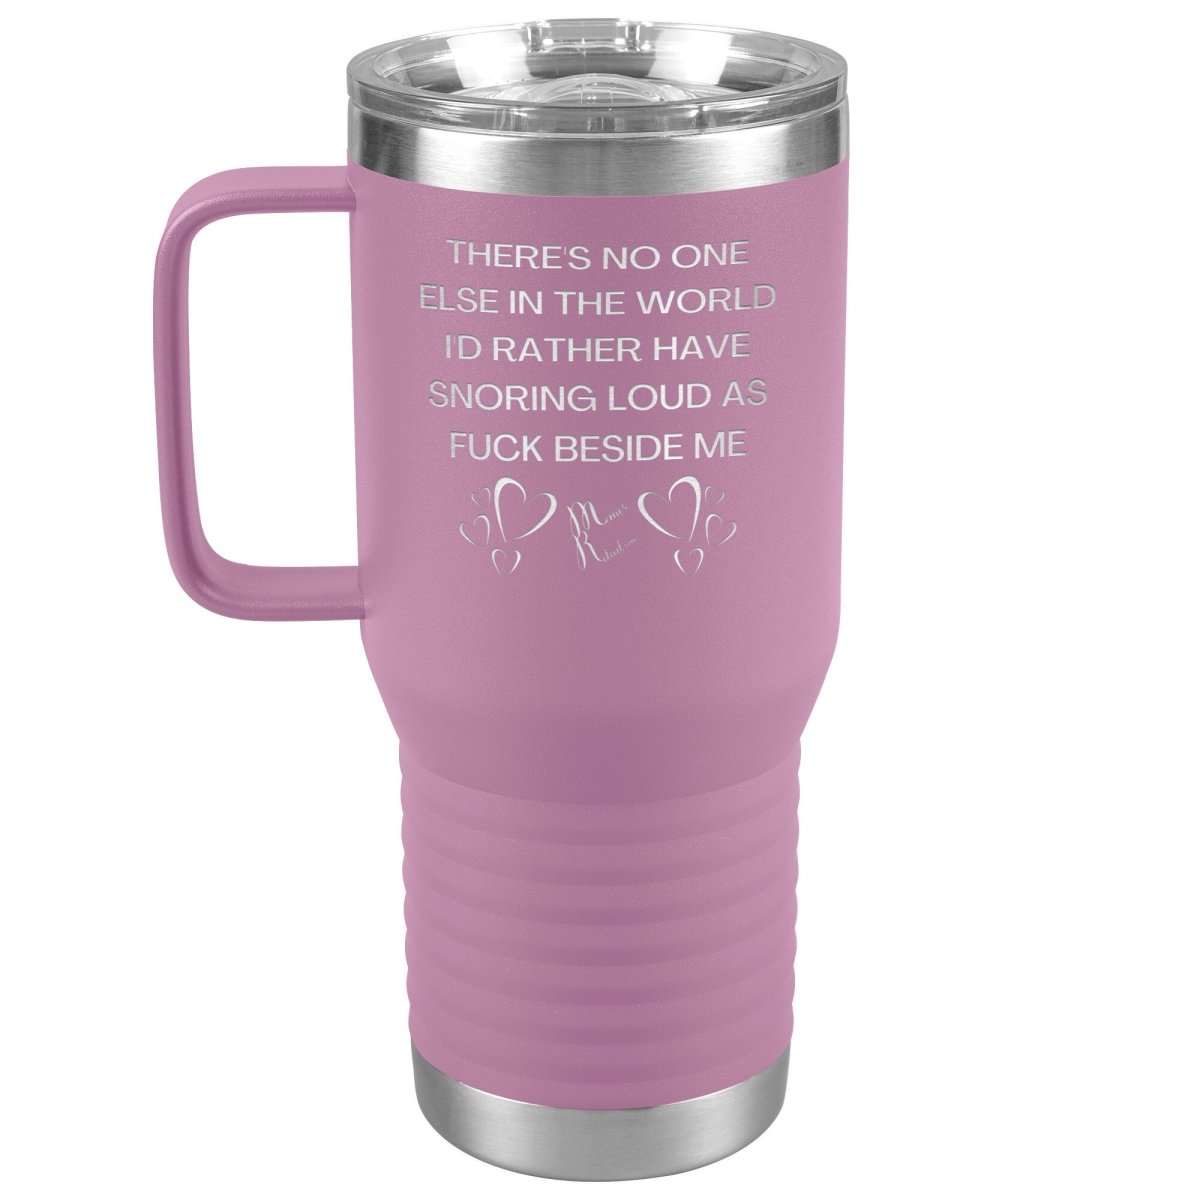 There's No One Else in the World I'd Rather Have Snoring Loud, 20oz Travel Tumbler / Light Purple - MemesRetail.com